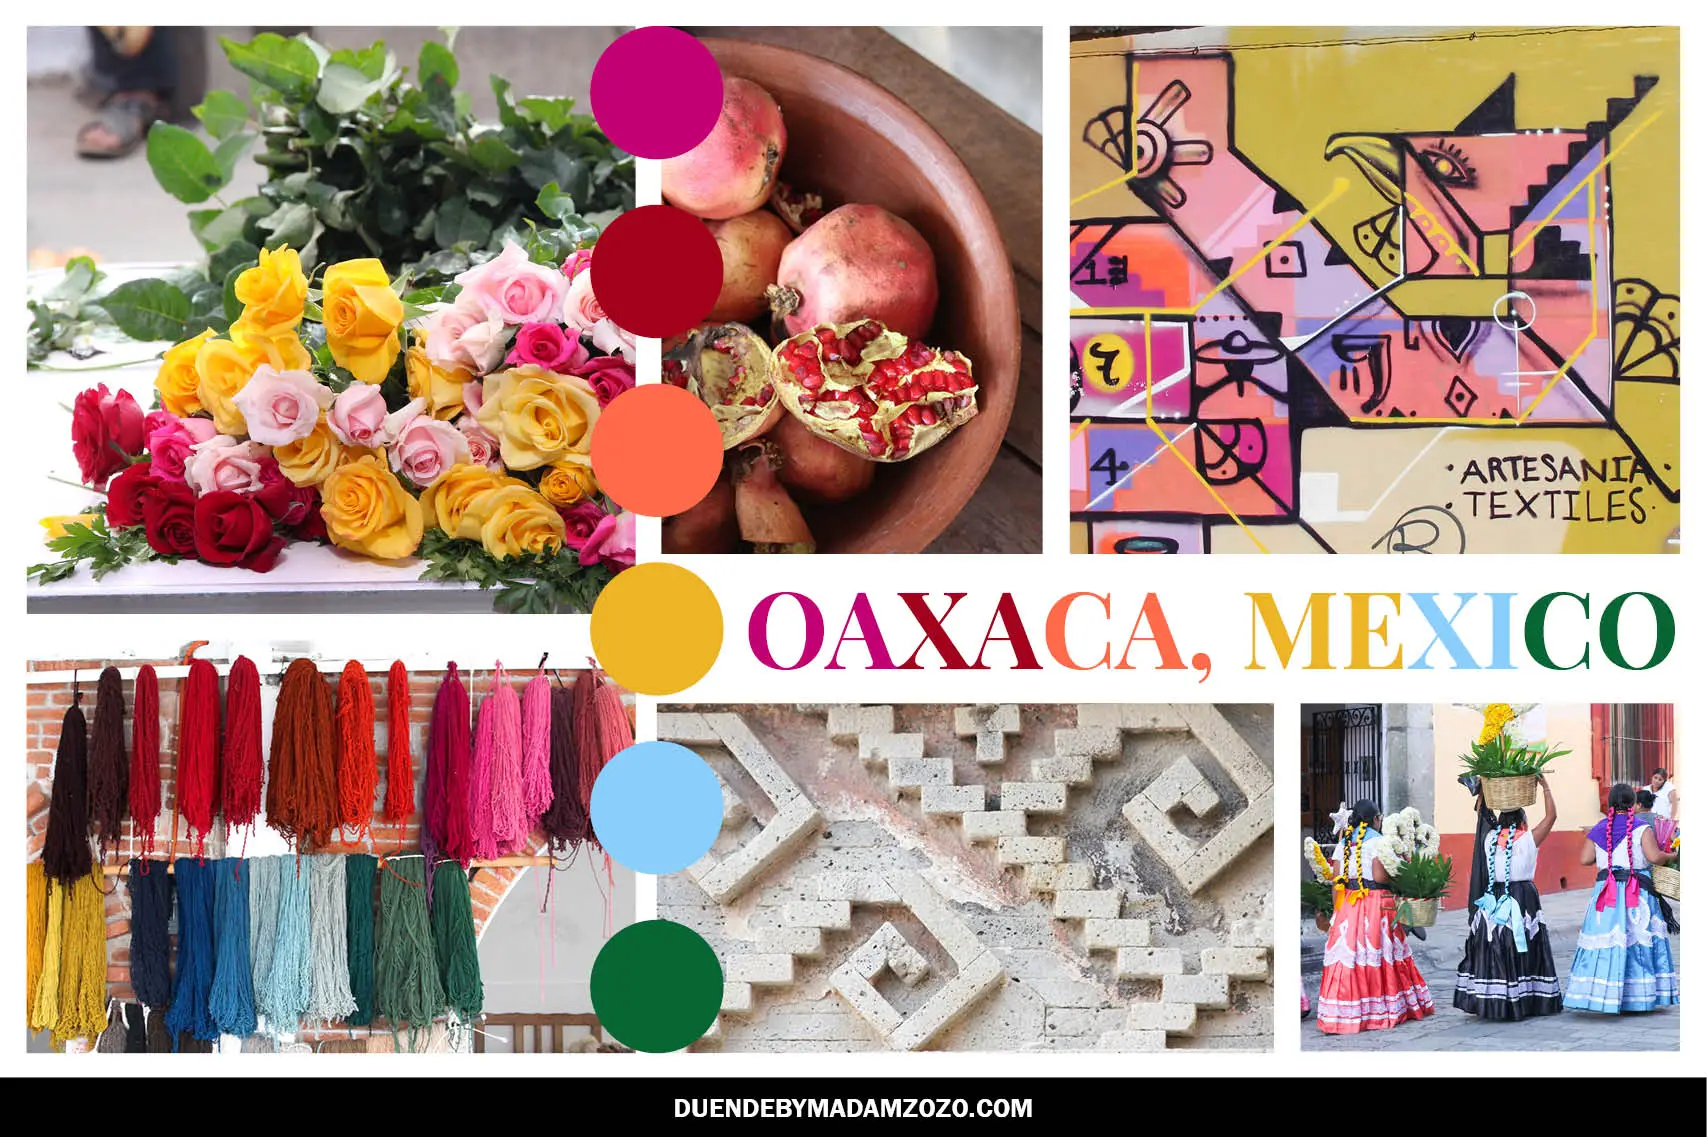 Mood board of photos and colours inspired by Oaxaca, Mexico